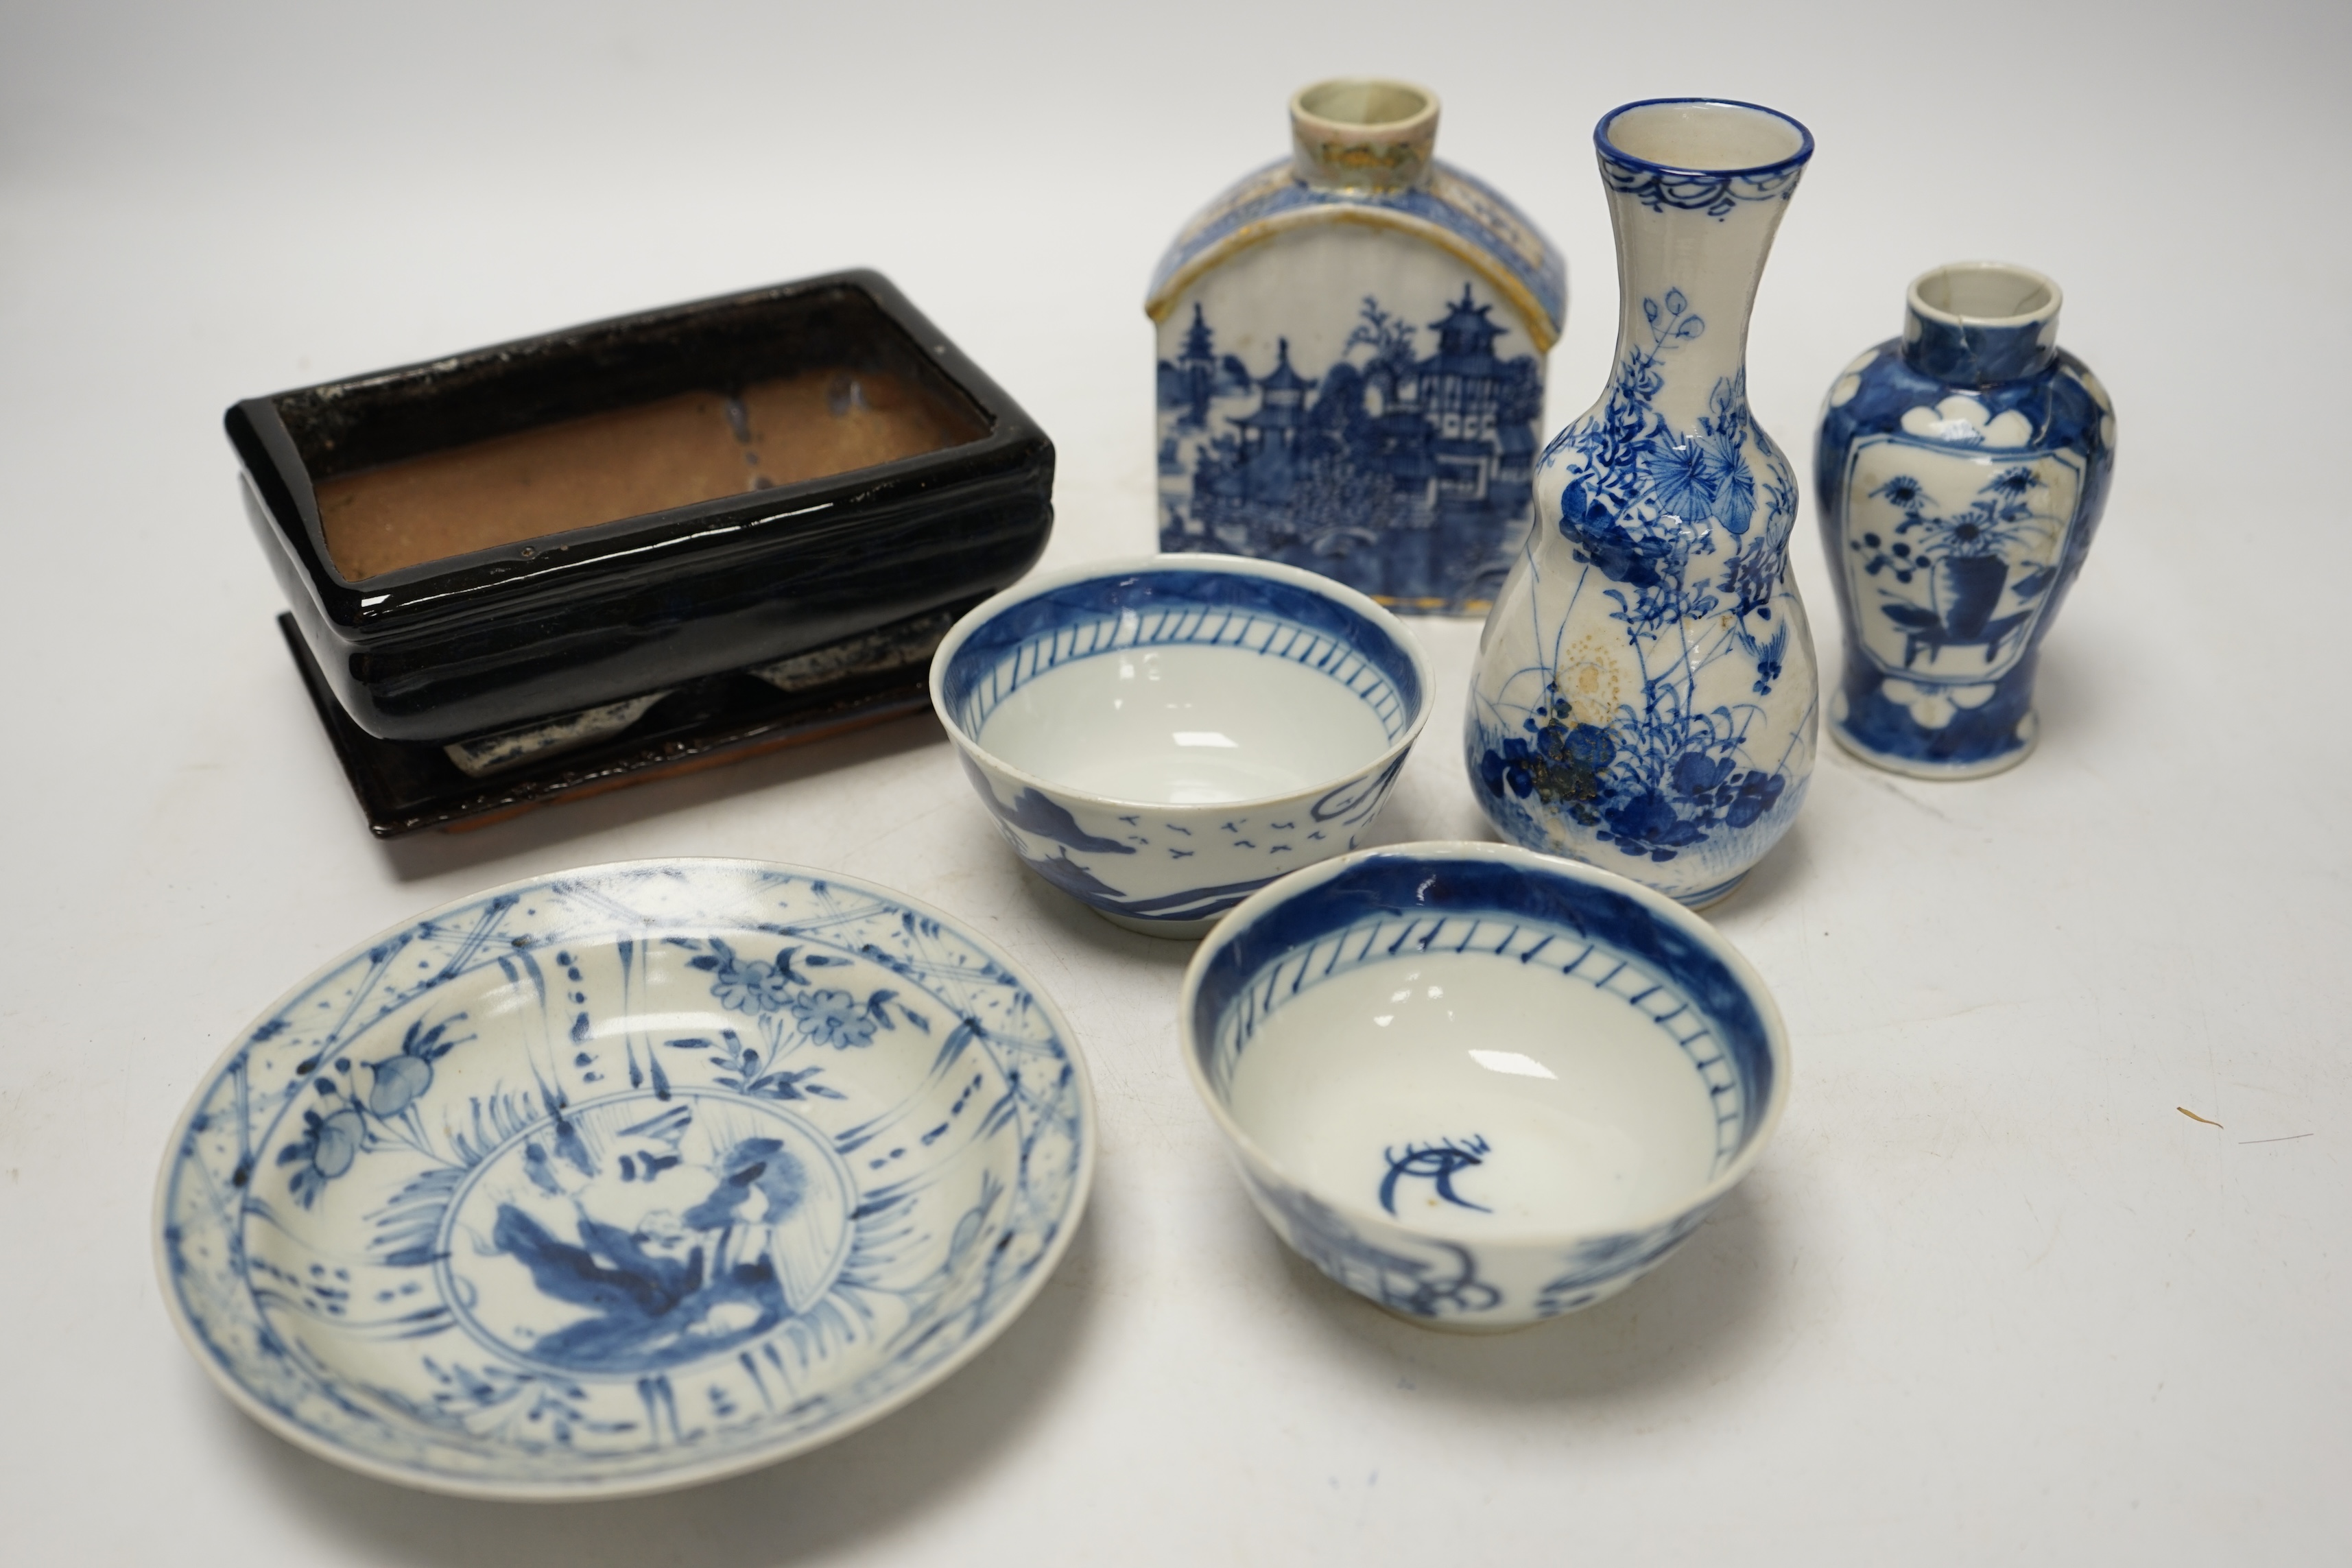 Chinese ceramics to include blue and white bowls and vases, largest 15cm wide. Condition - poor to fair